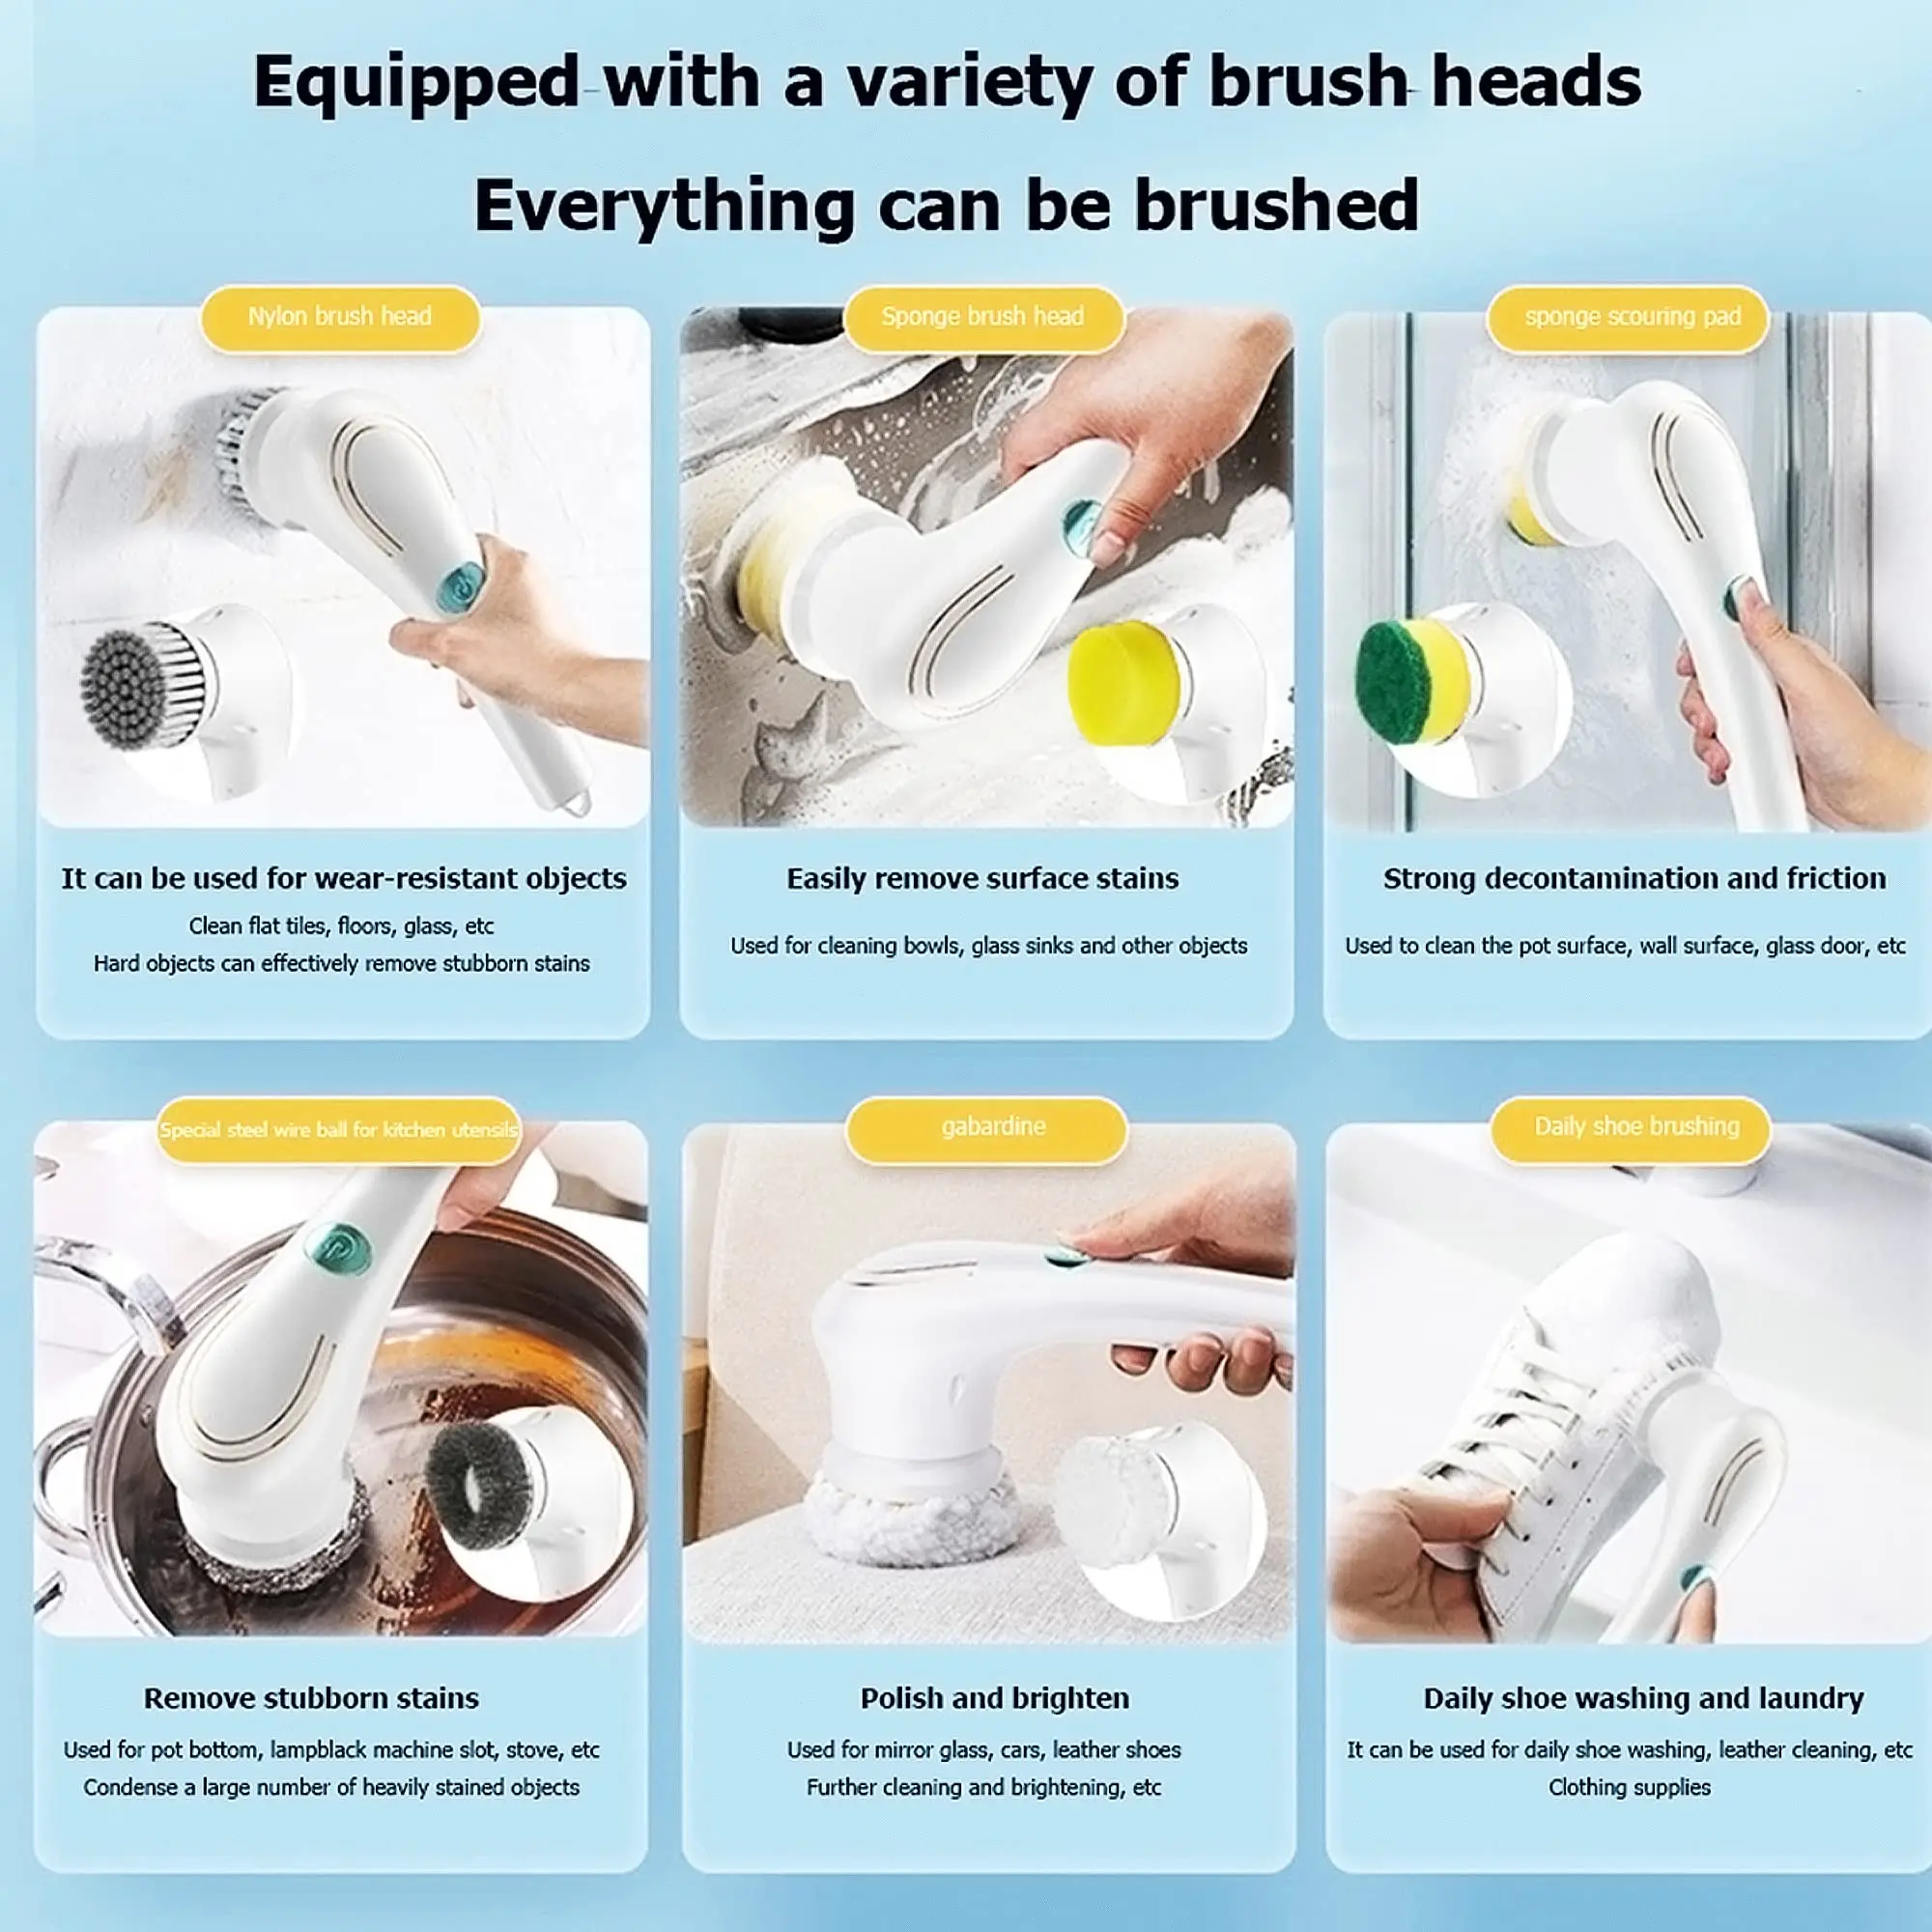 S8e9290f582784a1aabf6f517d73b453f7 USB Rechargeable 360° Electric Spin Scrubber Cordless Handheld Scrubber with 5 Replaceable Brush Heads, Electric Floor Scrubber